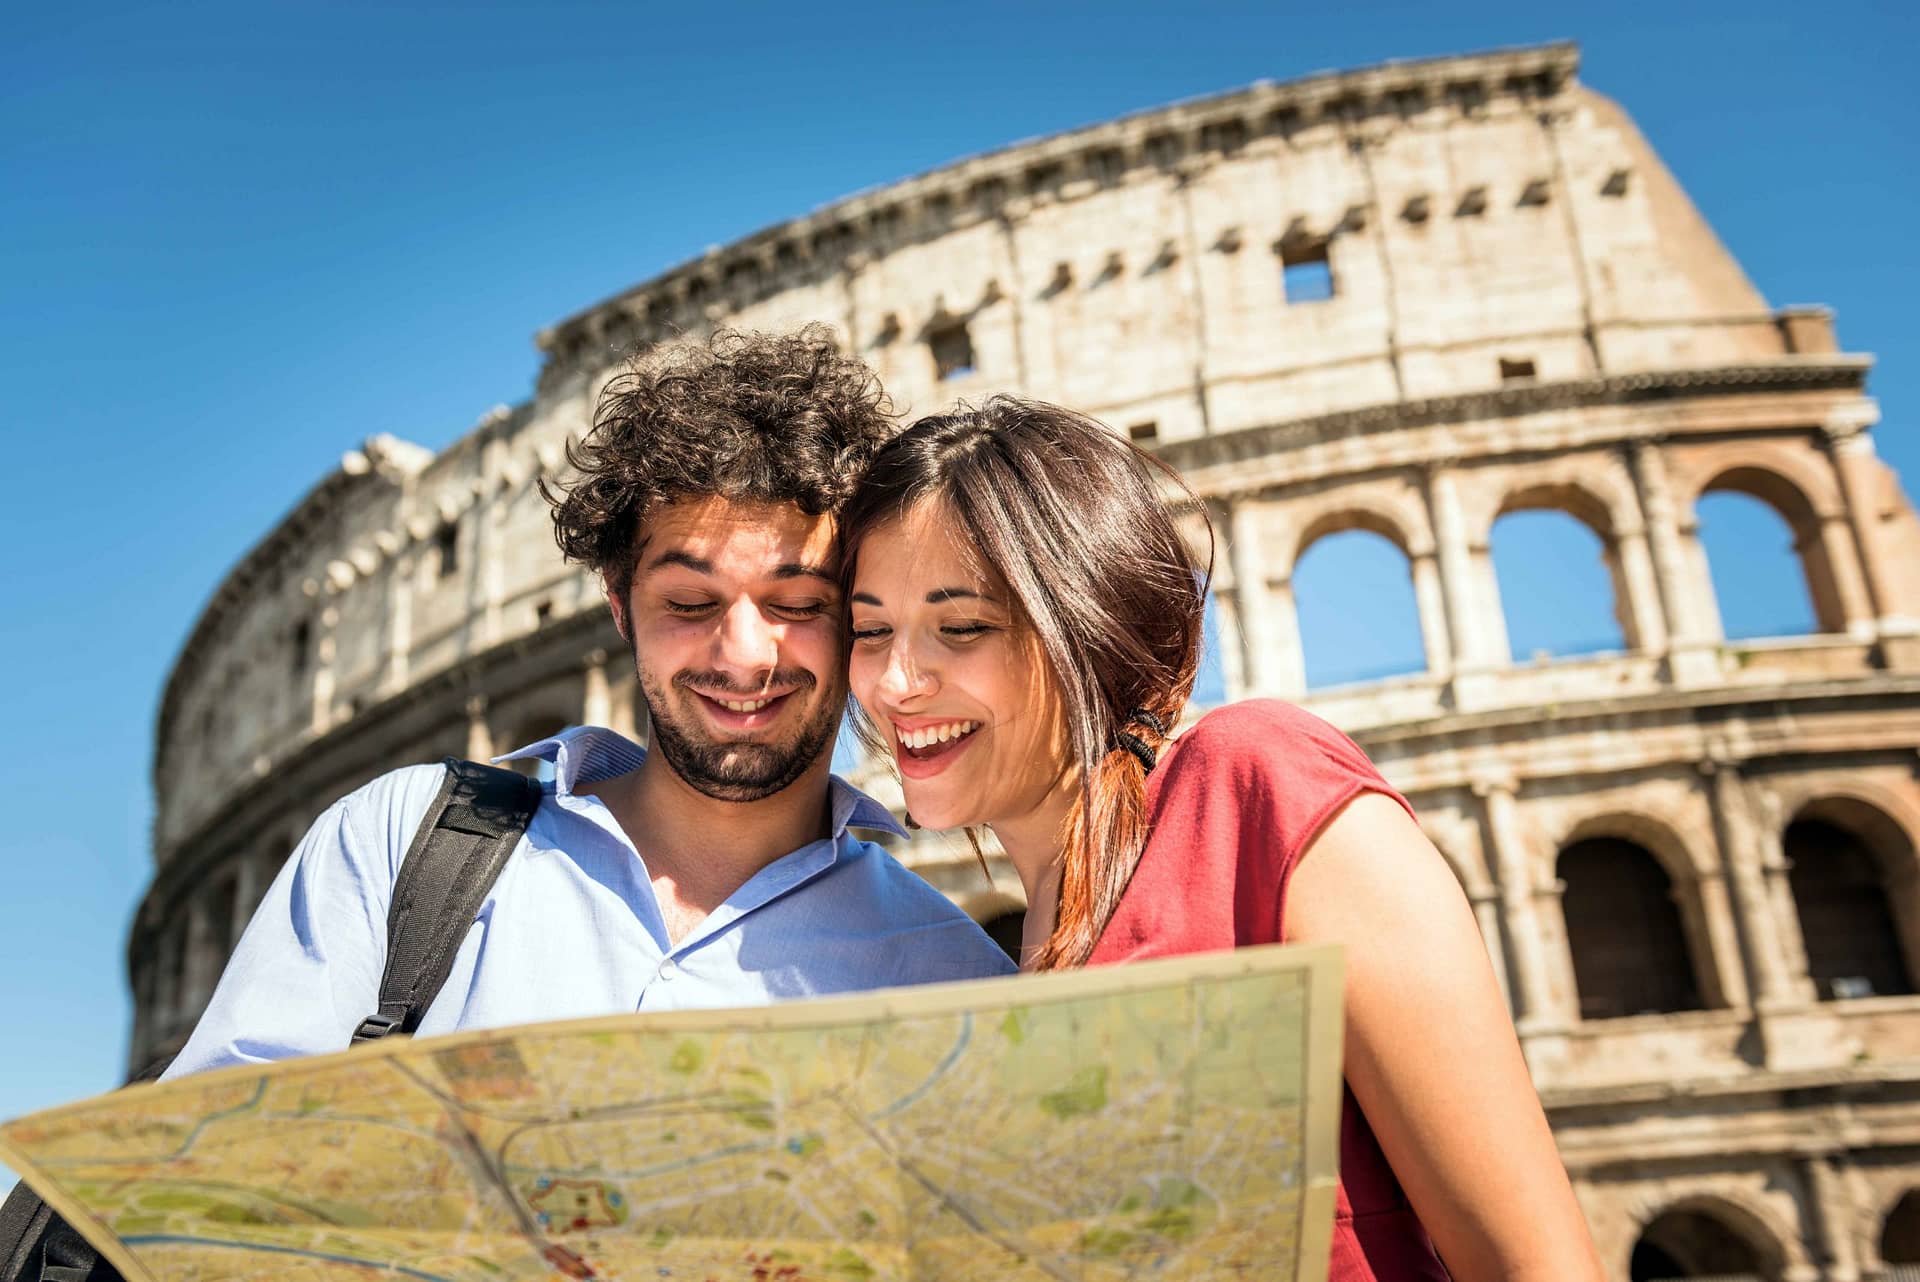 Tourists in front of the Colosseom in Rome reading a city map